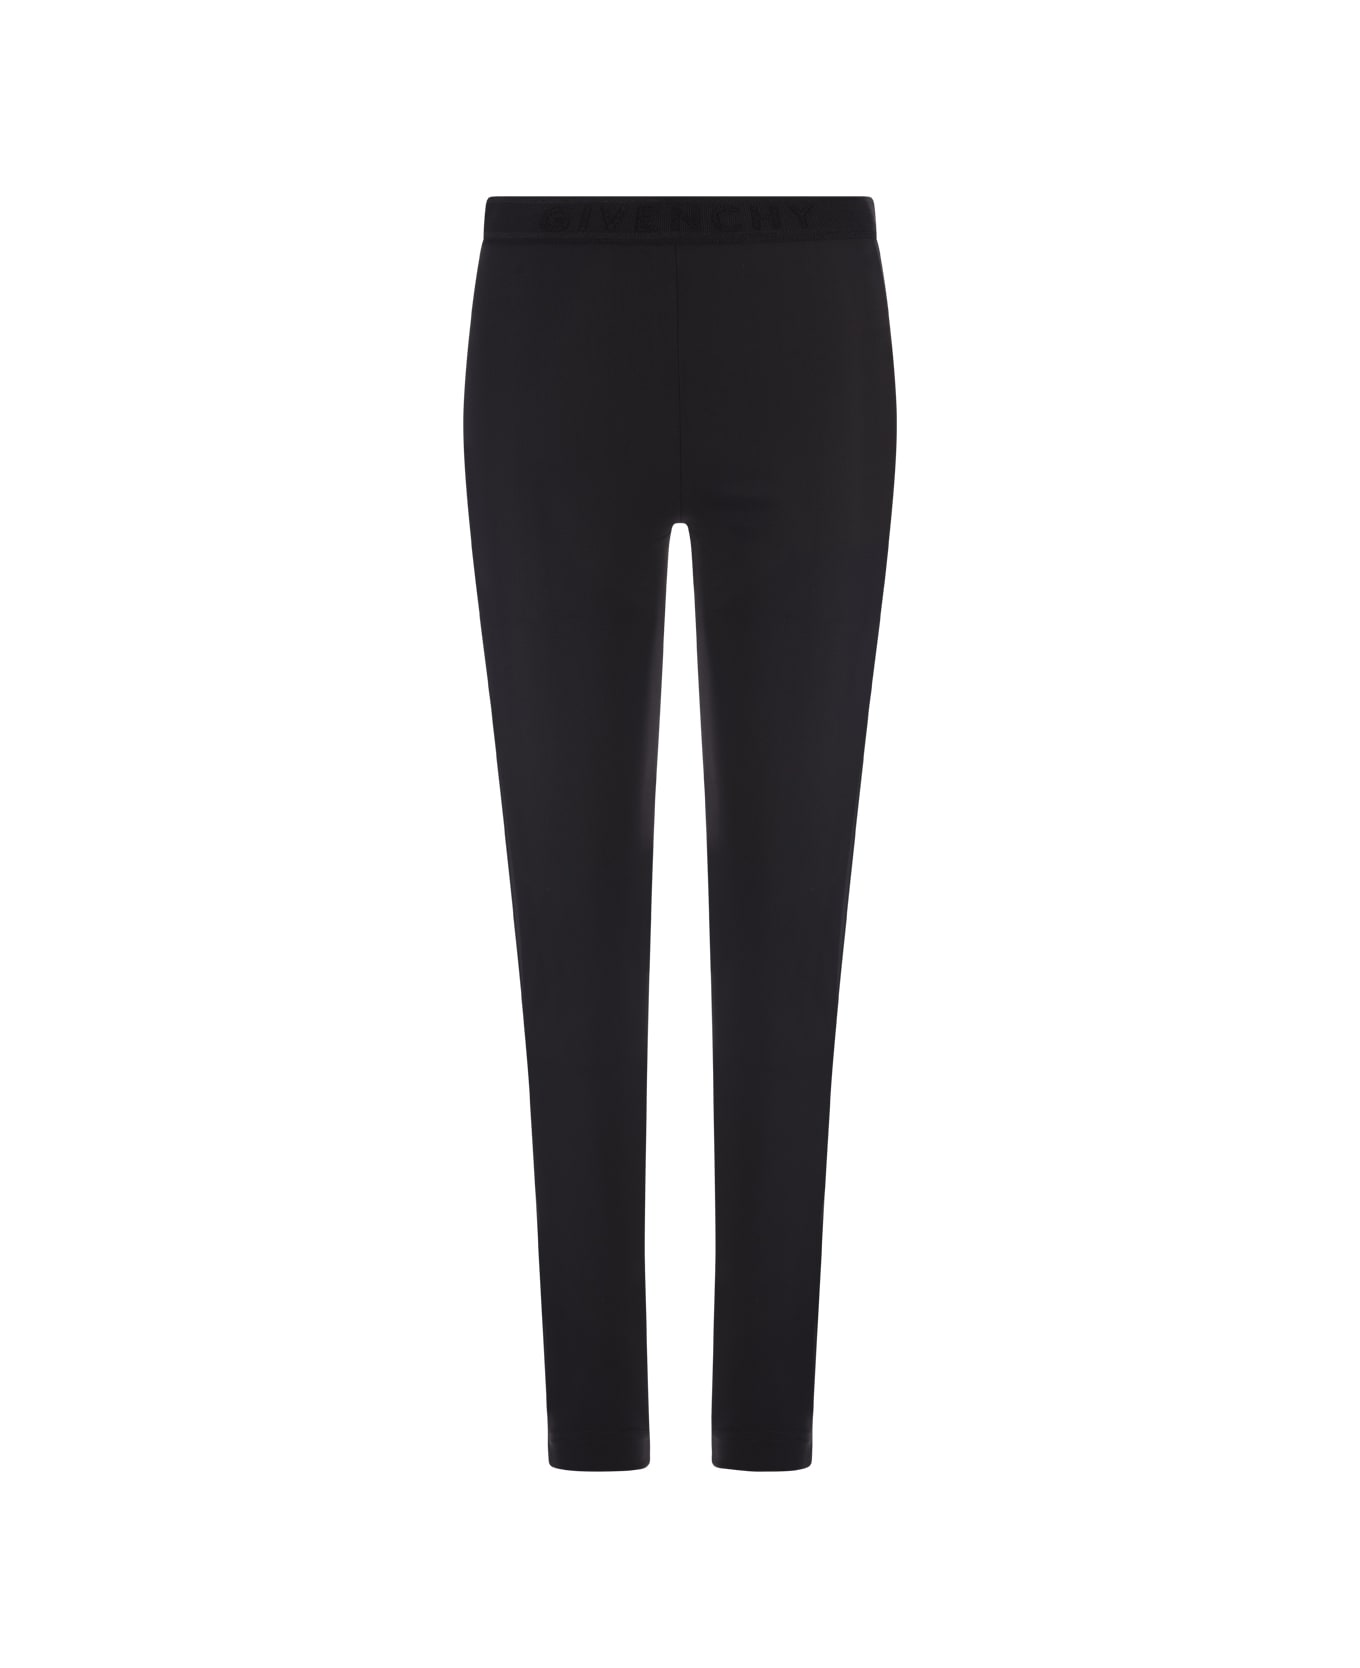 Givenchy Black Jersey Leggings With Givenchy Belt - Black